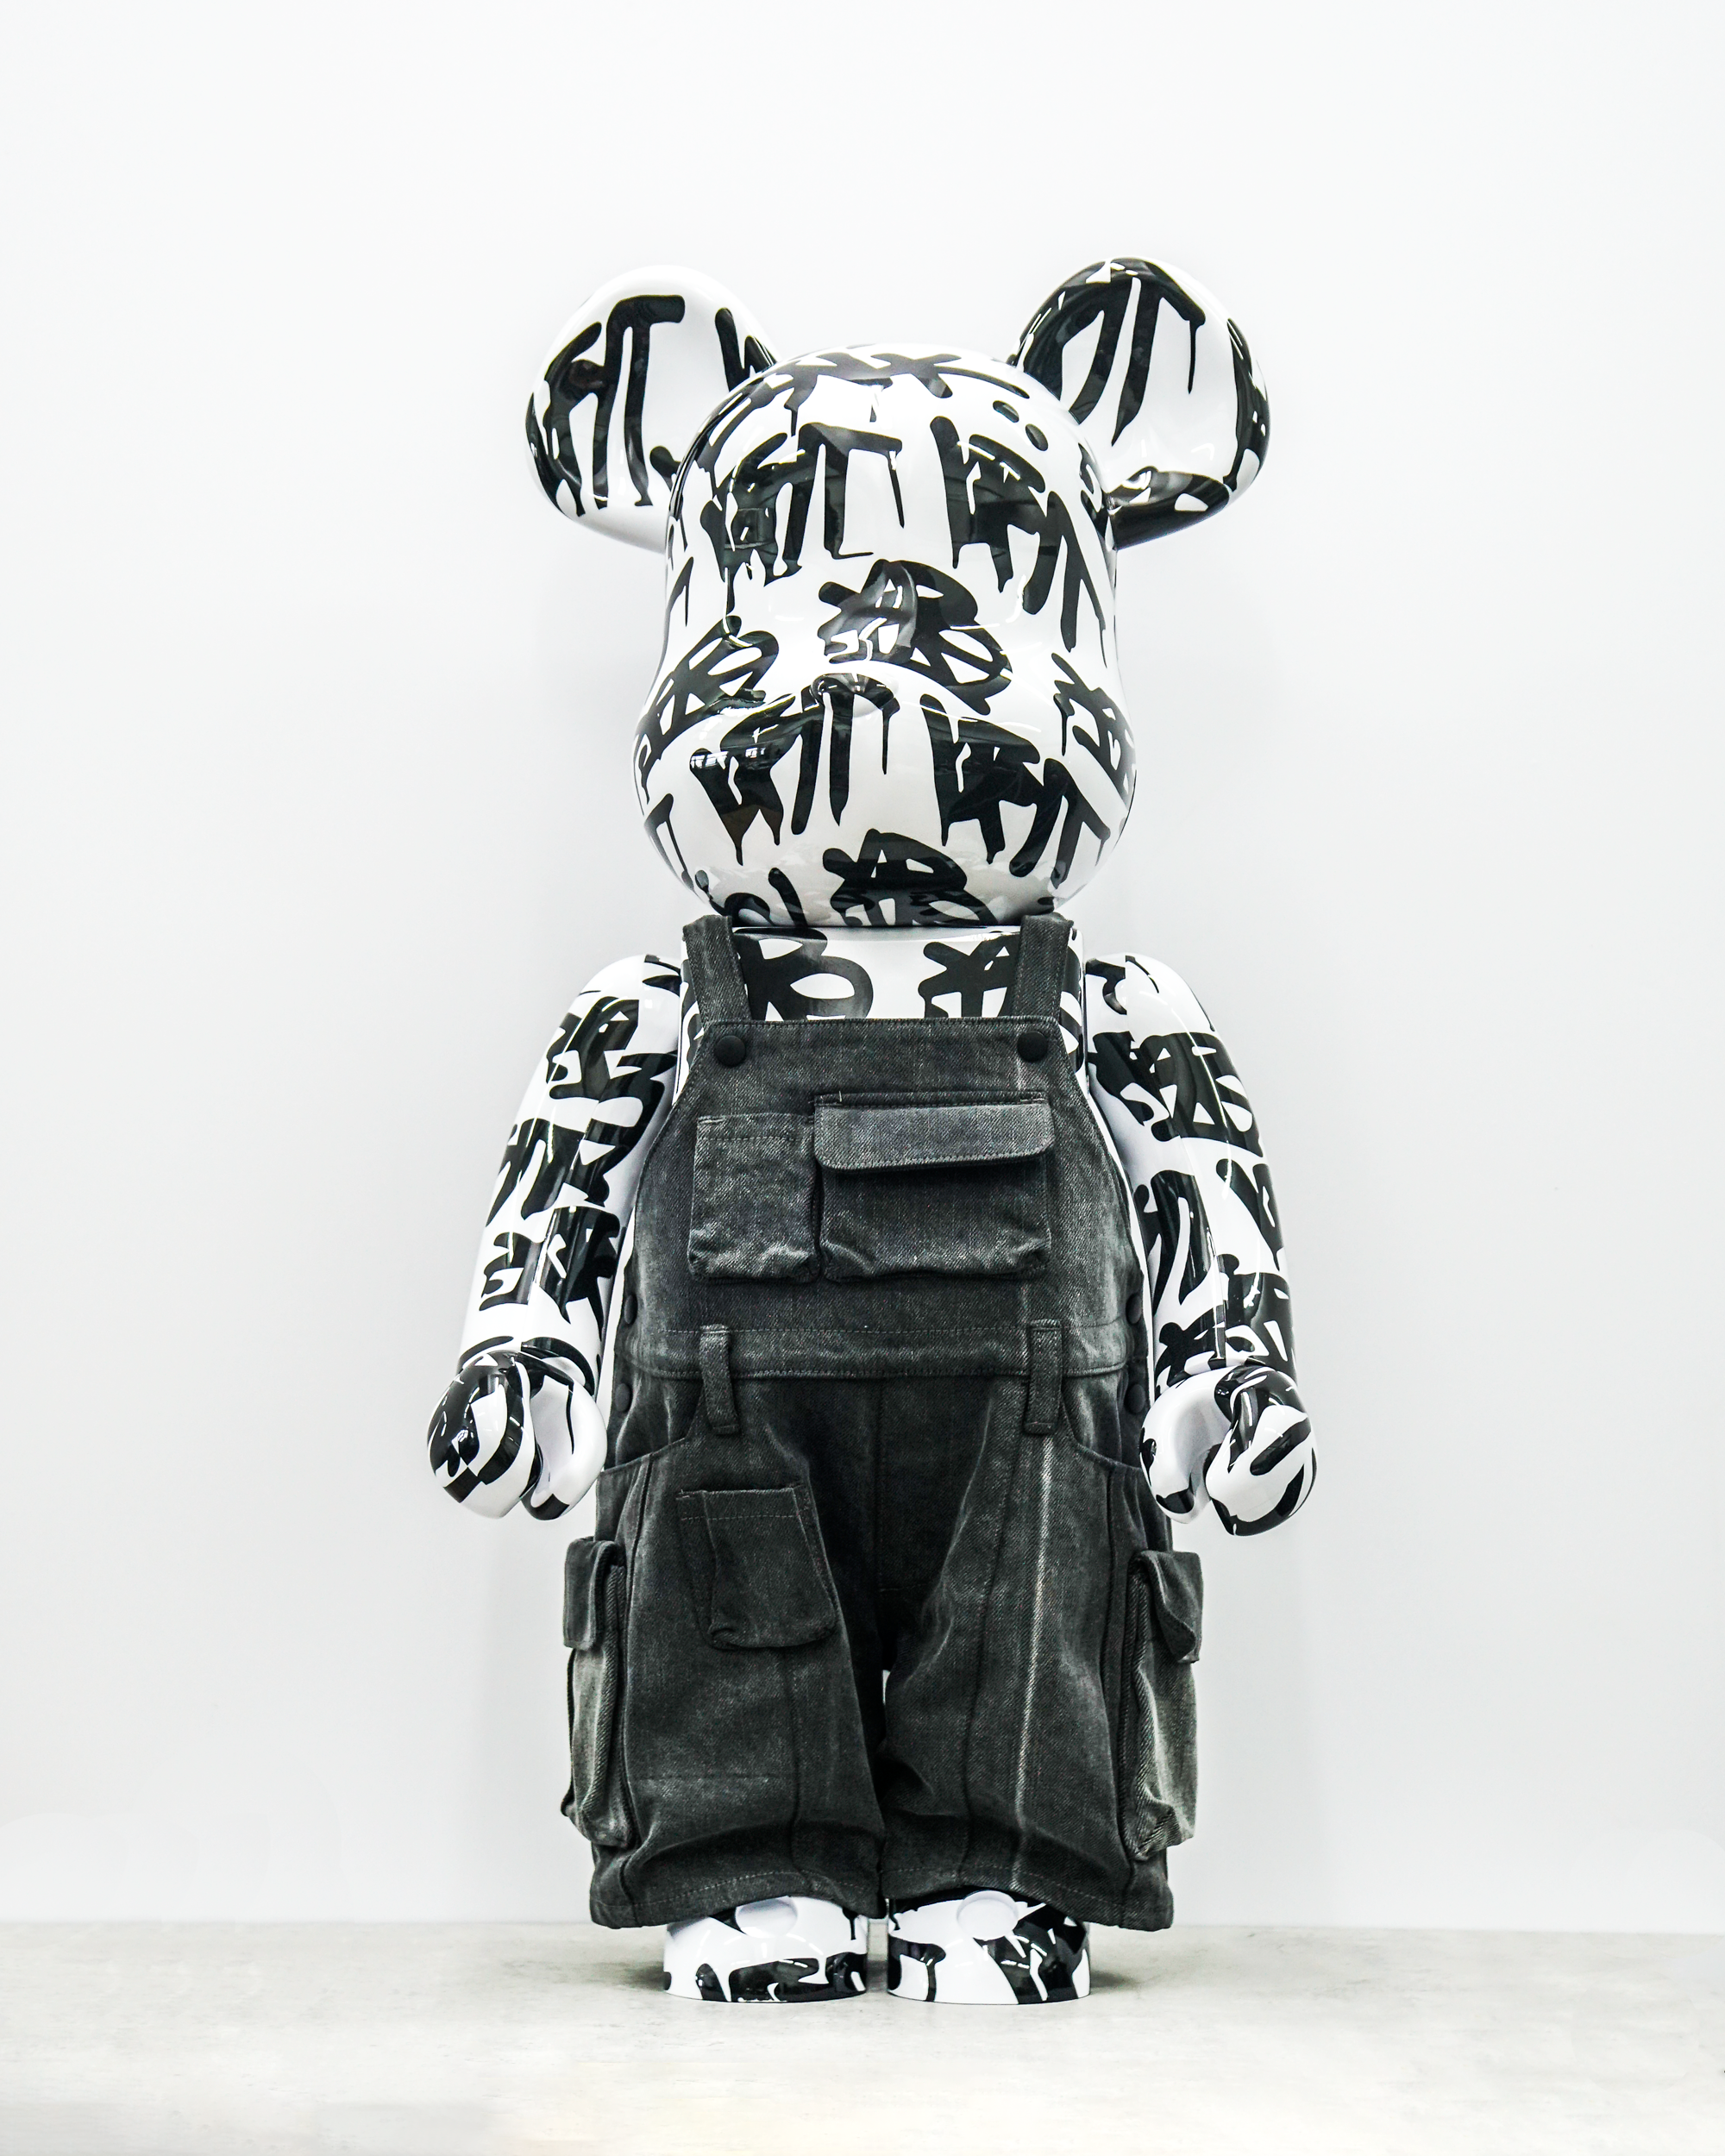 LFYT X KRINK BE@RBRICK  - 1000% (LAKH EXCLUSIVE VERSION)